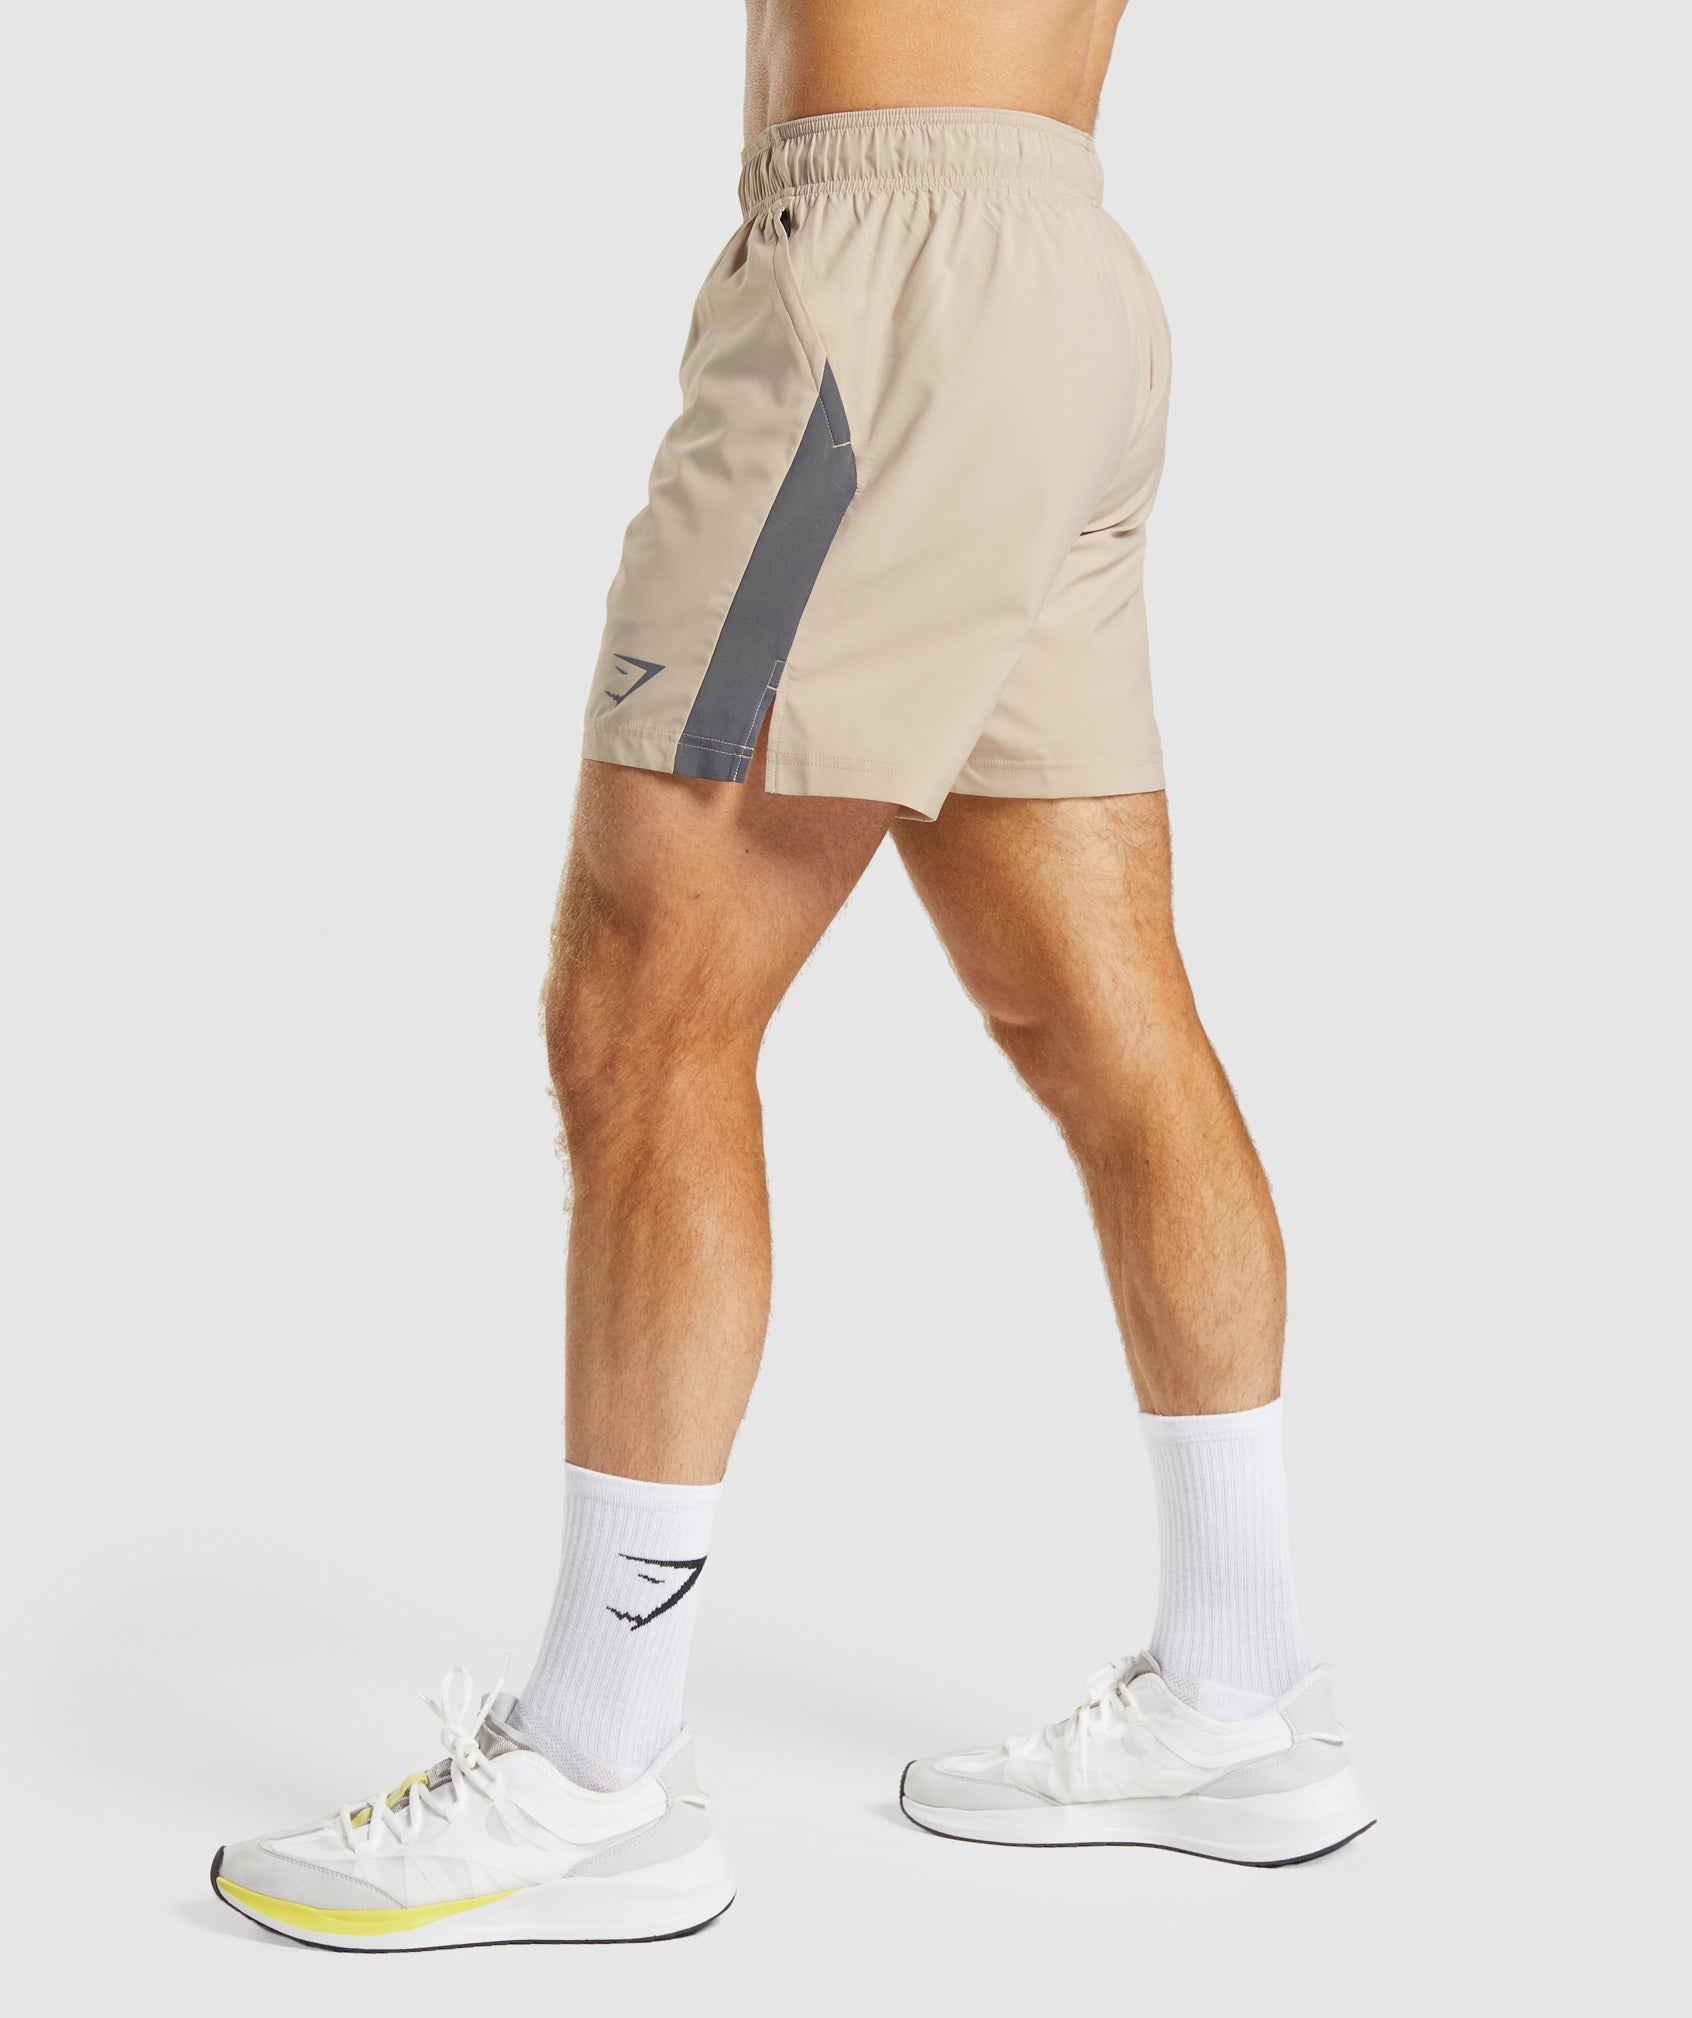 Sport Shorts in Toasted Brown/Silhouette Grey